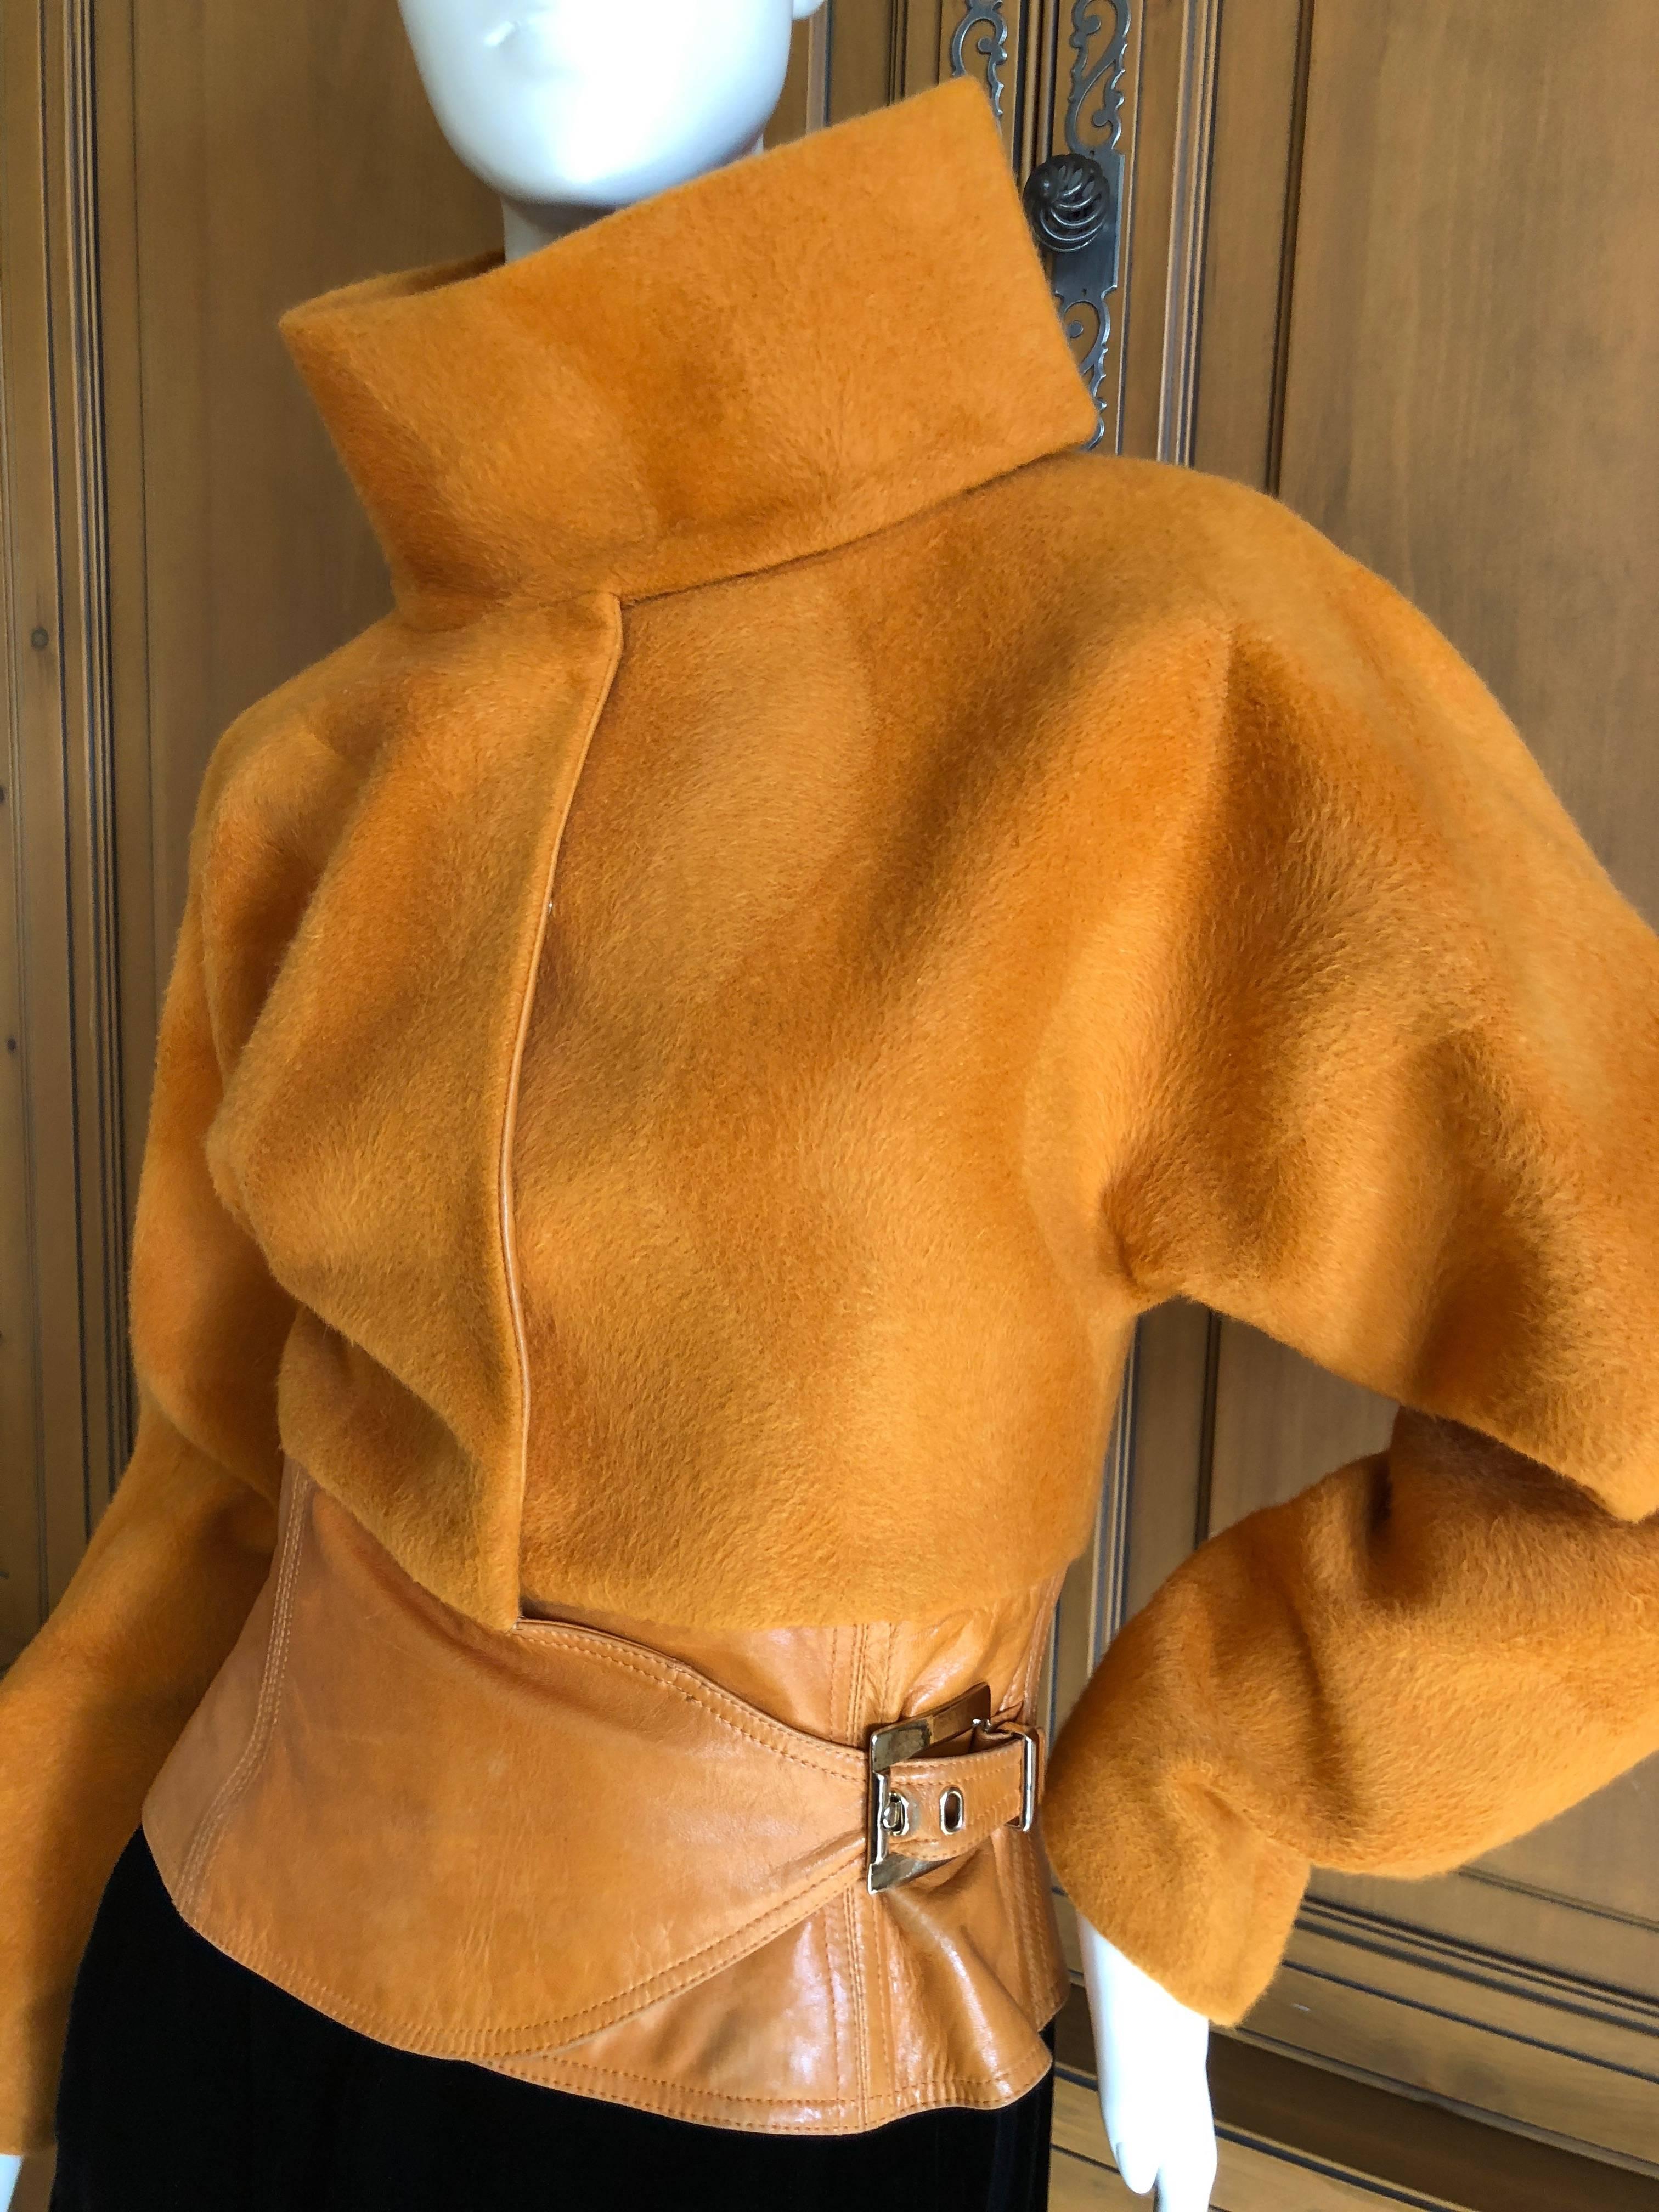 Gianni Versace Couture 1980's Luxurious Orange Wrap Jacket with Leather Trim For Sale 3